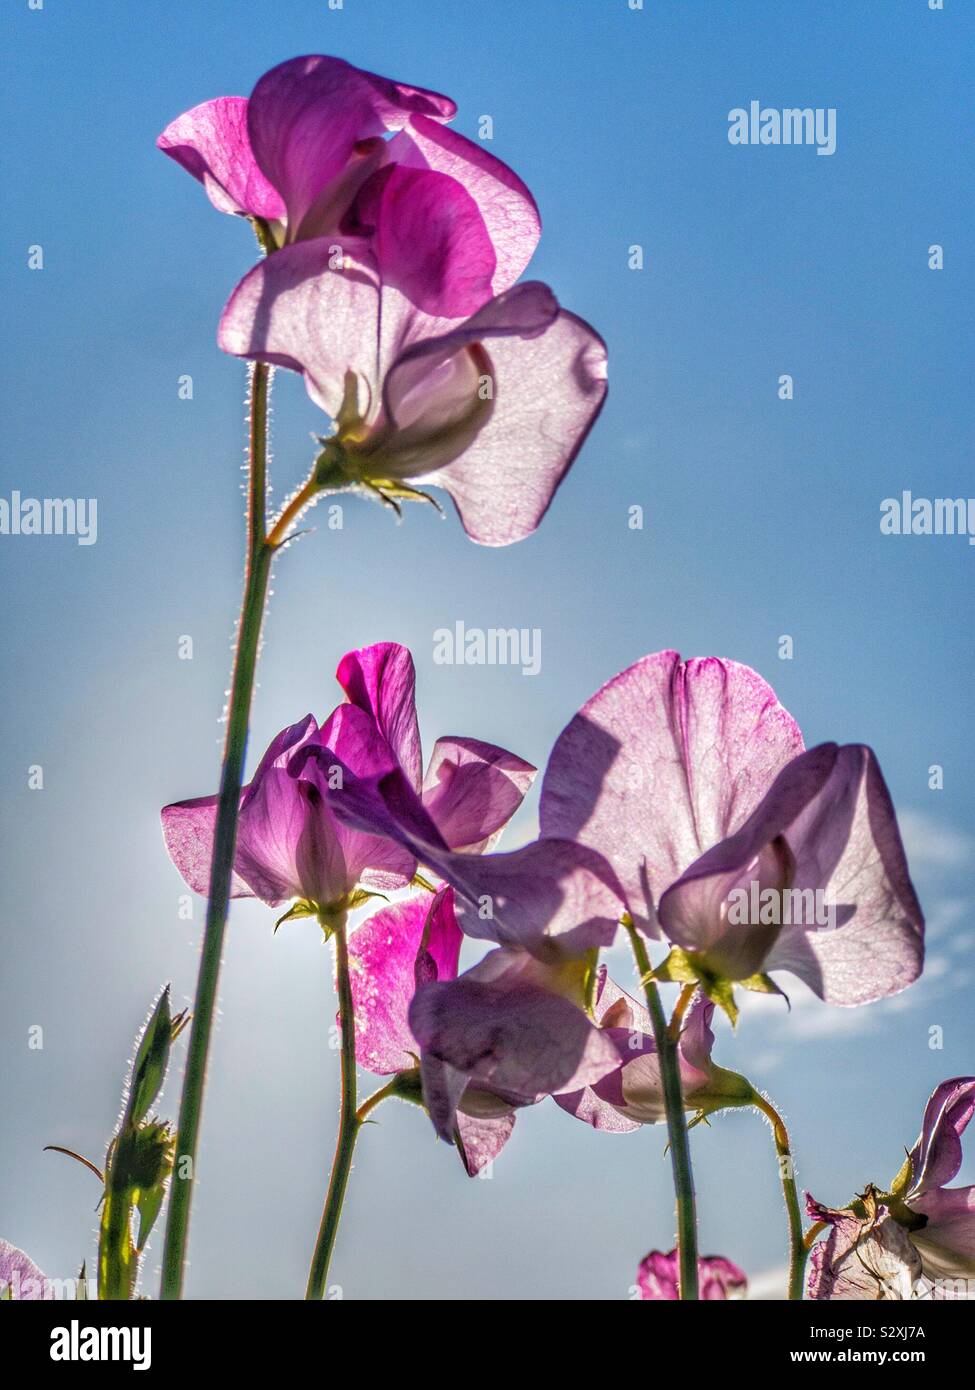 Sweet pea flowers against a blue sky. Stock Photo